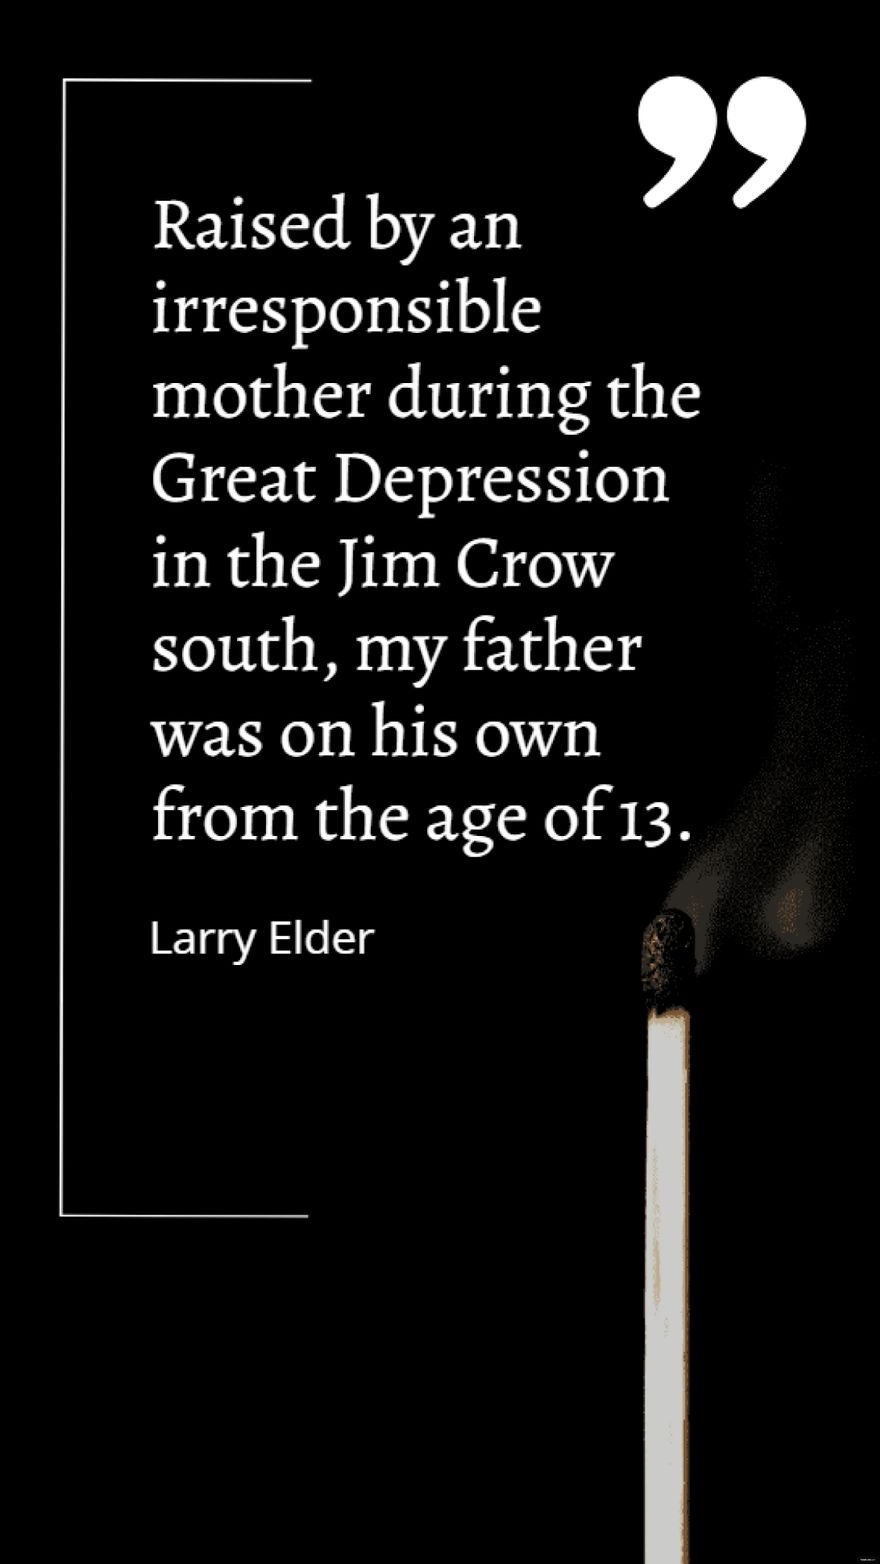 Larry Elder - Raised by an irresponsible mother during the Great Depression in the Jim Crow south, my father was on his own from the age of 13.